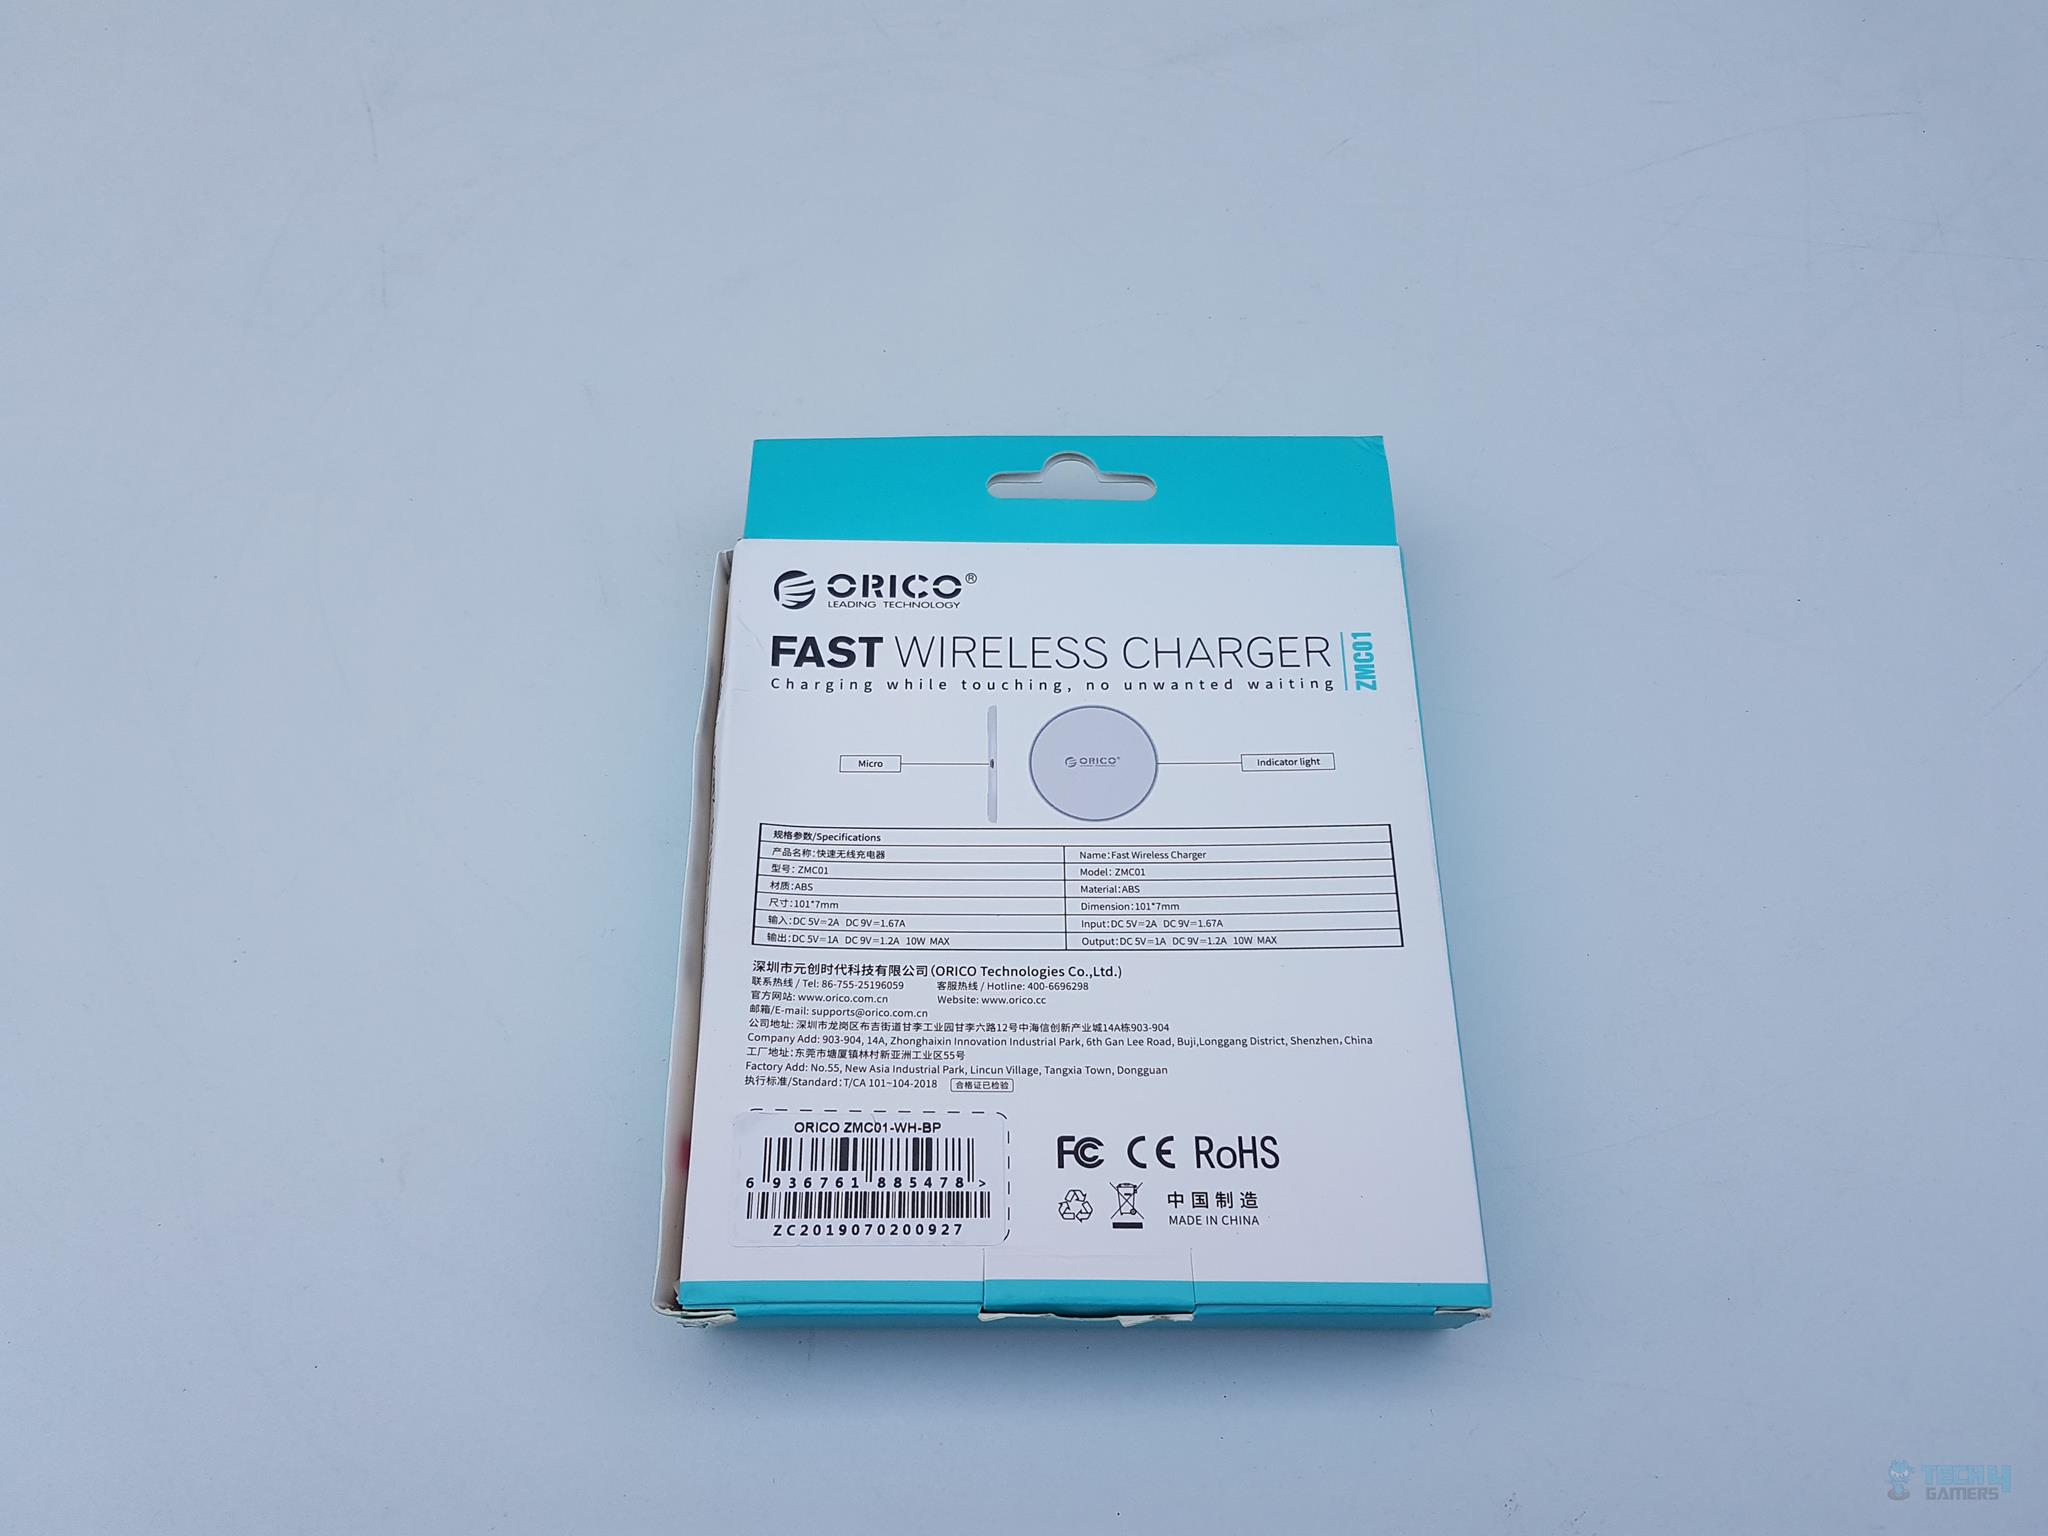 Fast Wireless Charger Backside Packaging 